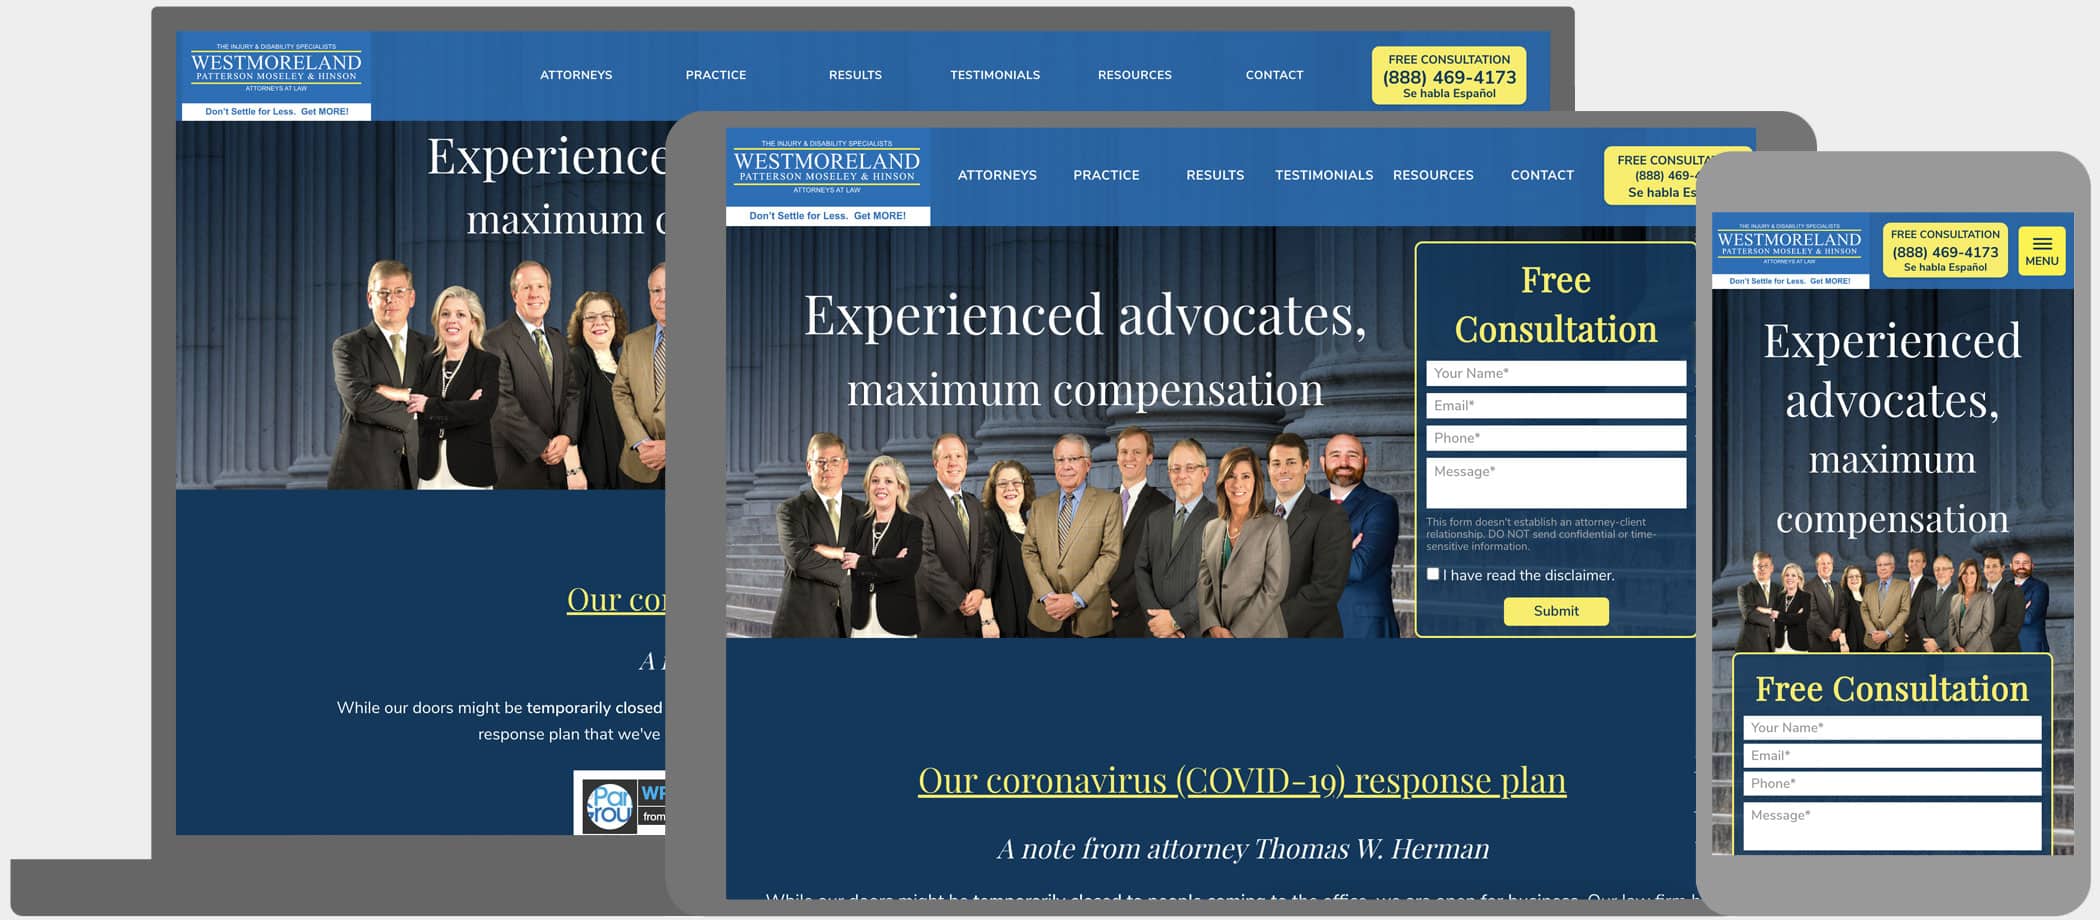 Westmoreland Patterson Moseley & Hinson, L.L.P: SEO friendly design featuring analytics & reporting, blog, and responsive site